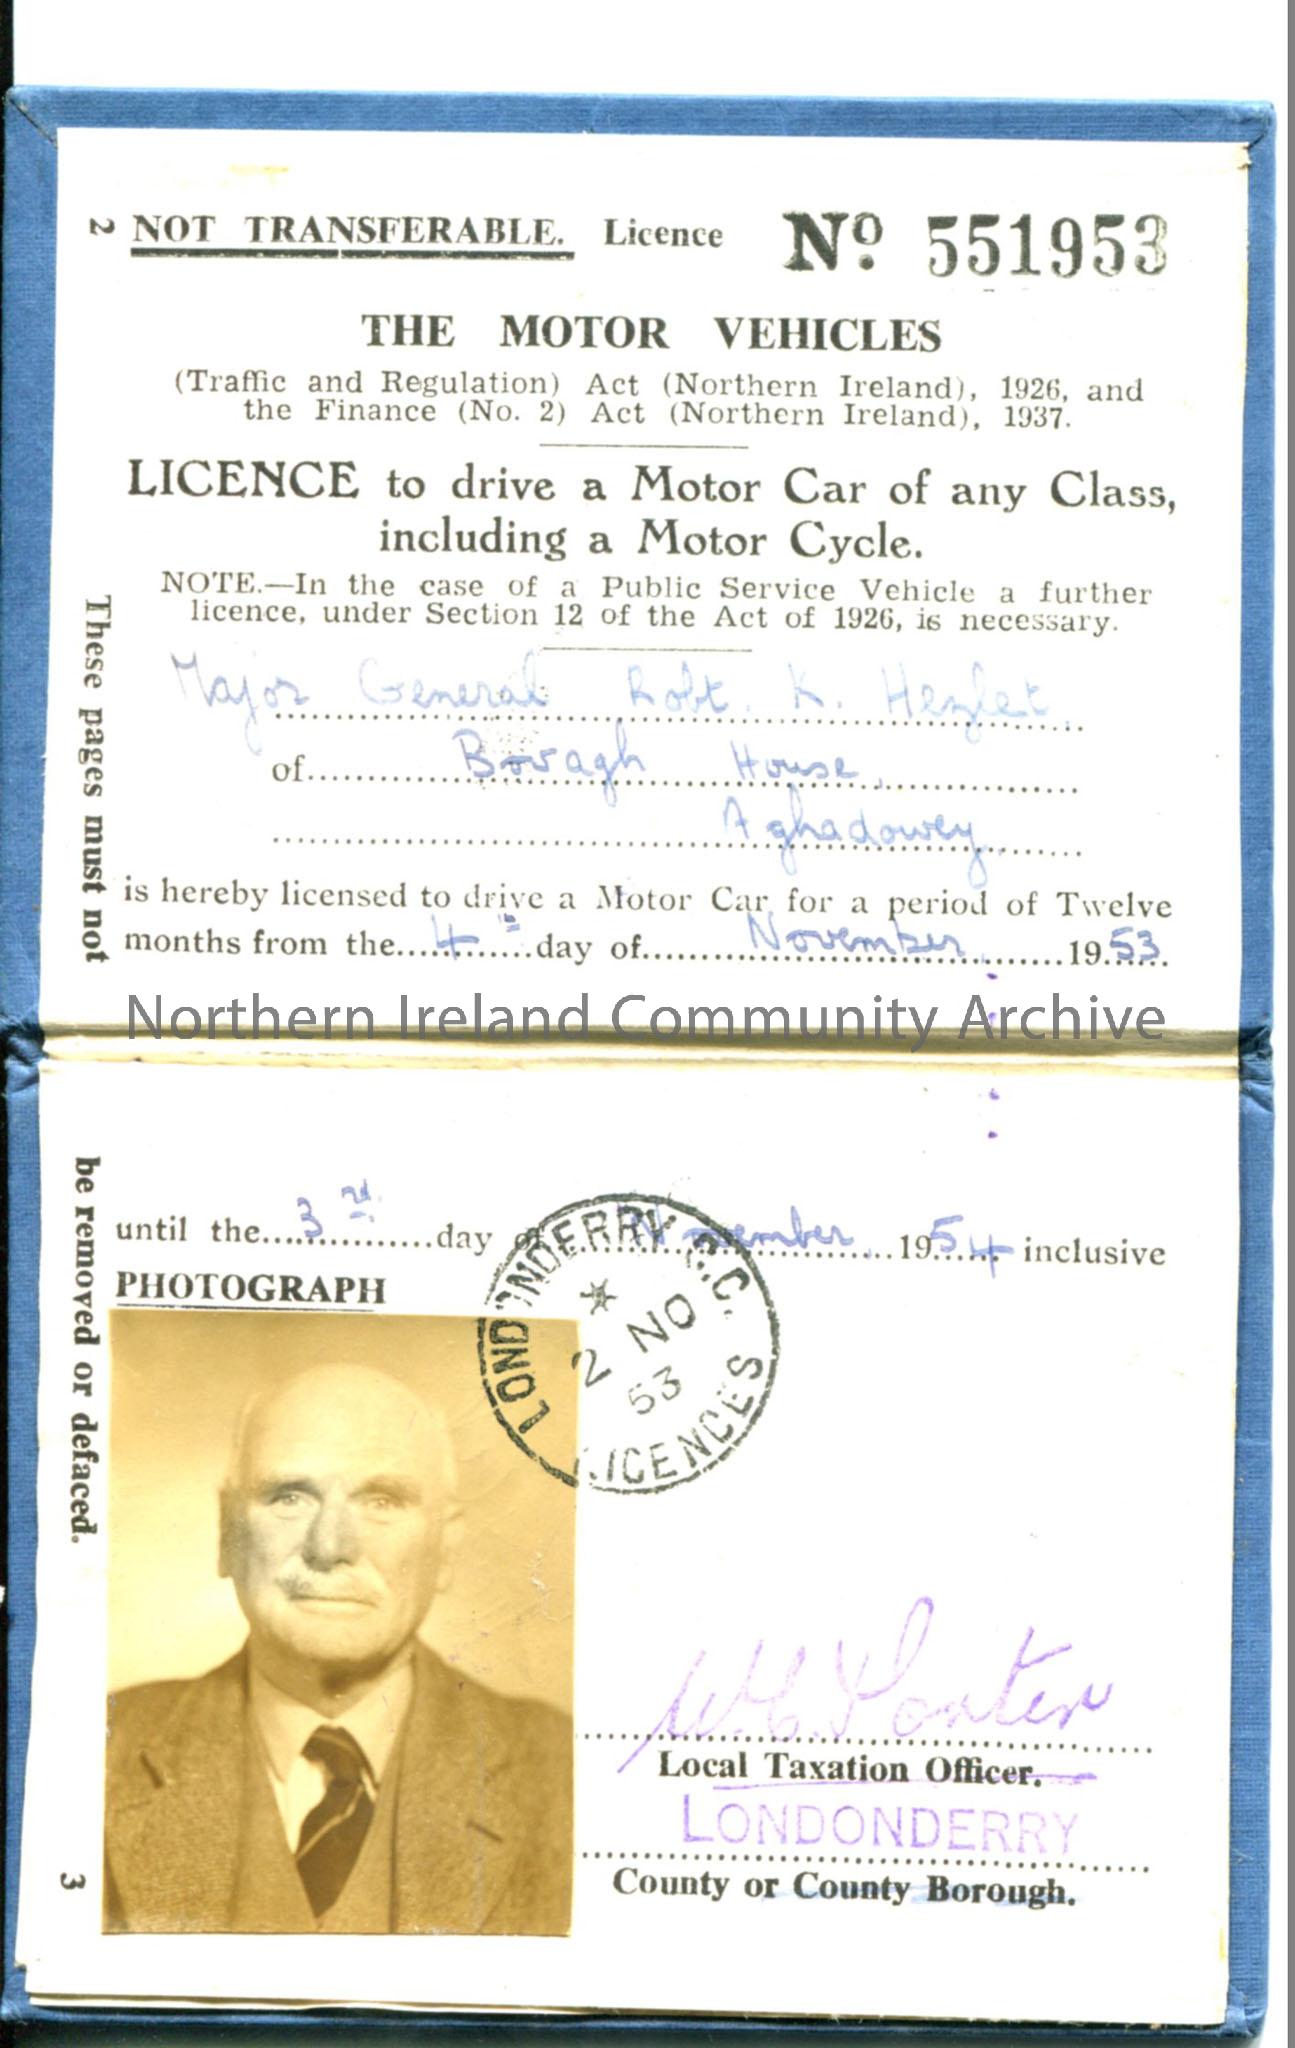 Driving licence of R K Hezlet, issued for 1 year at a time, starting 1953